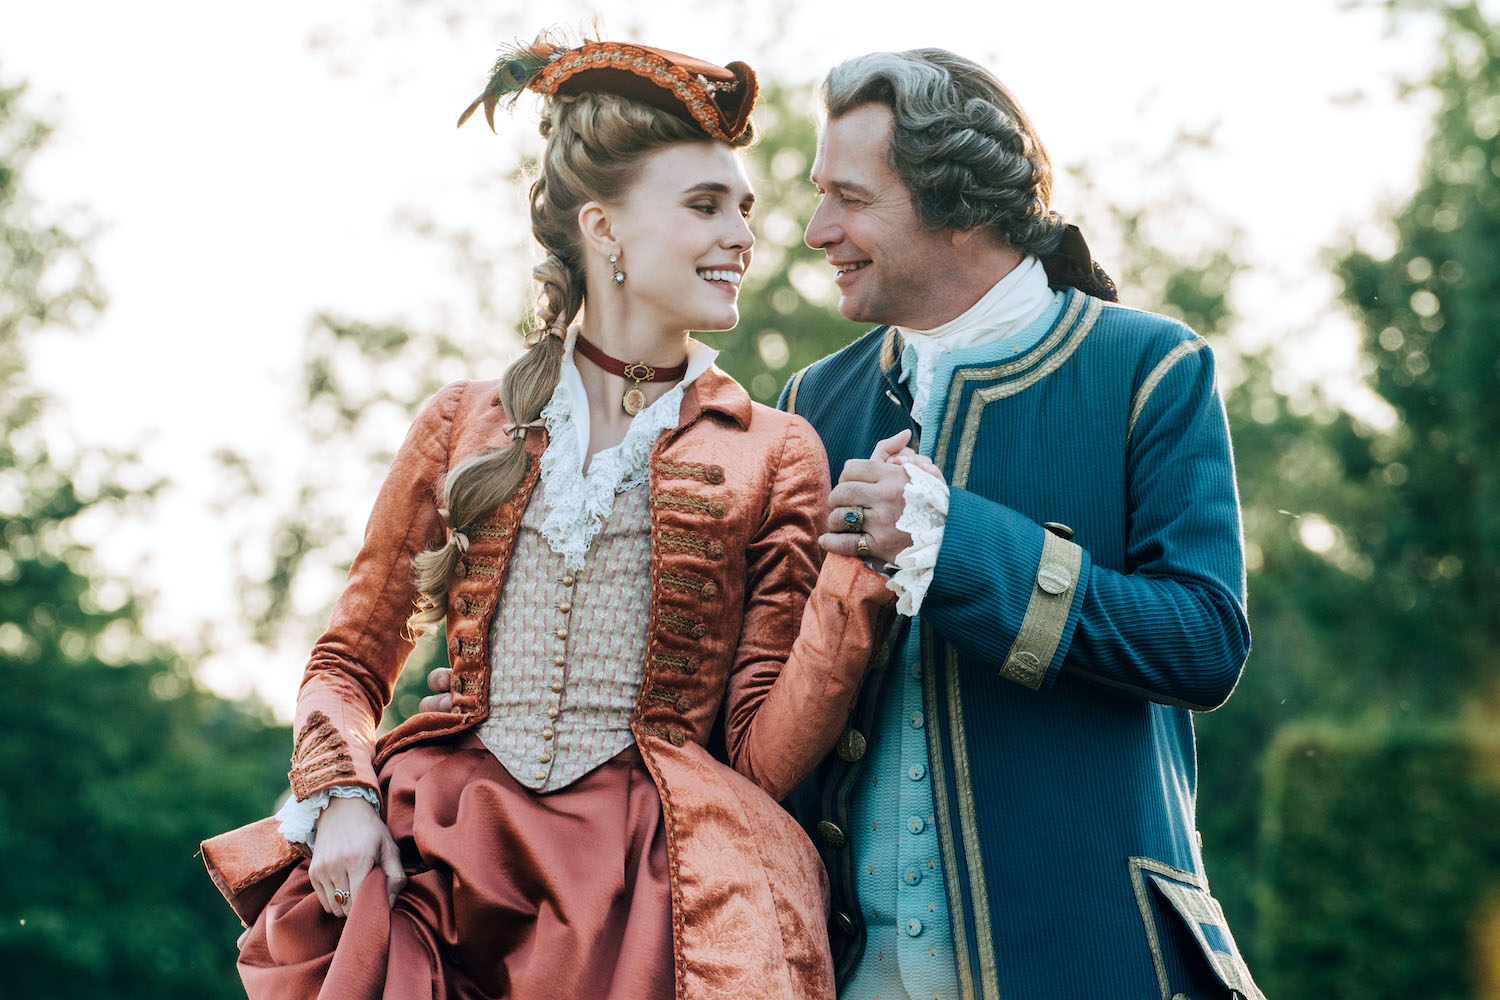 James Purefoy and Gaia Weiss in "Marie Antoinette"